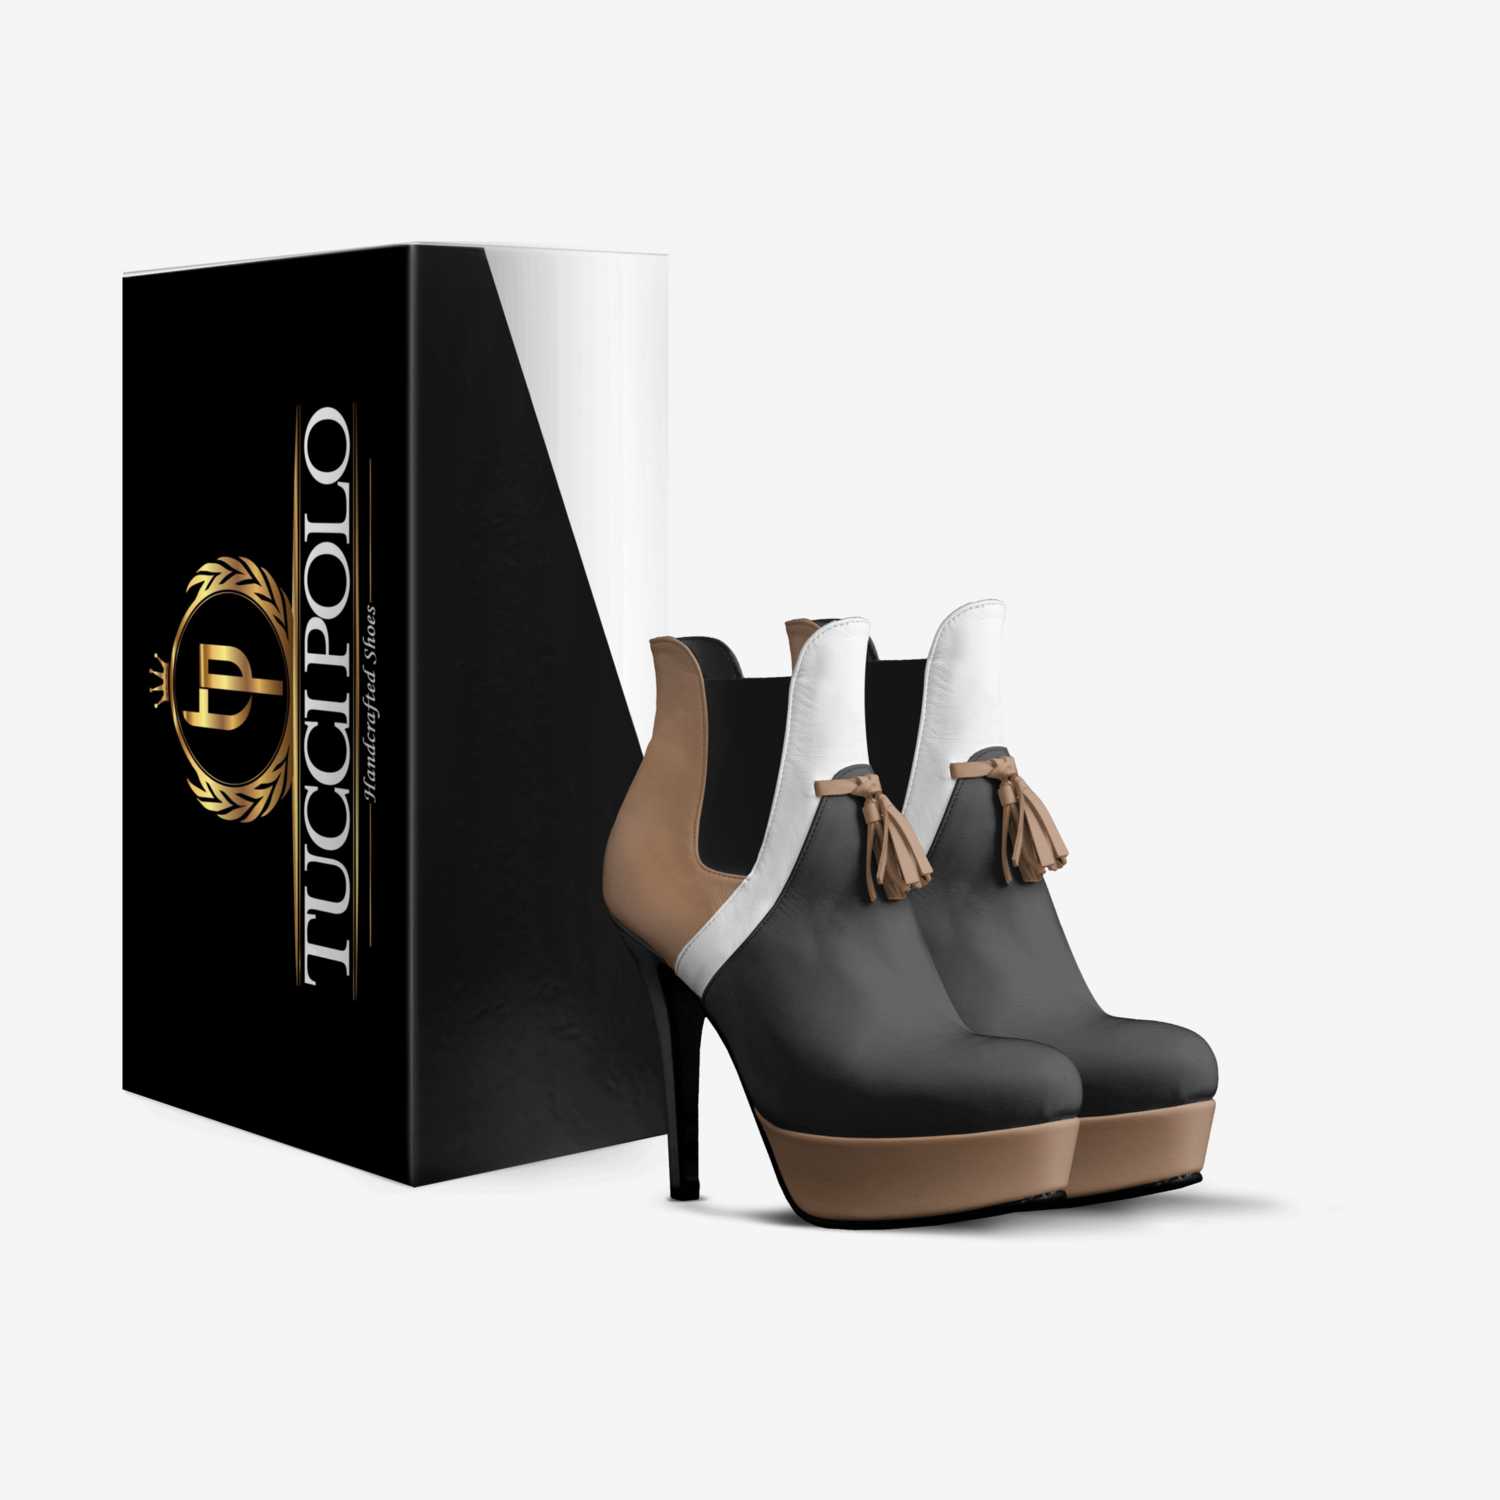 TucciPolo custom made in Italy shoes by Tochukwu Mbiamnozie | Box view